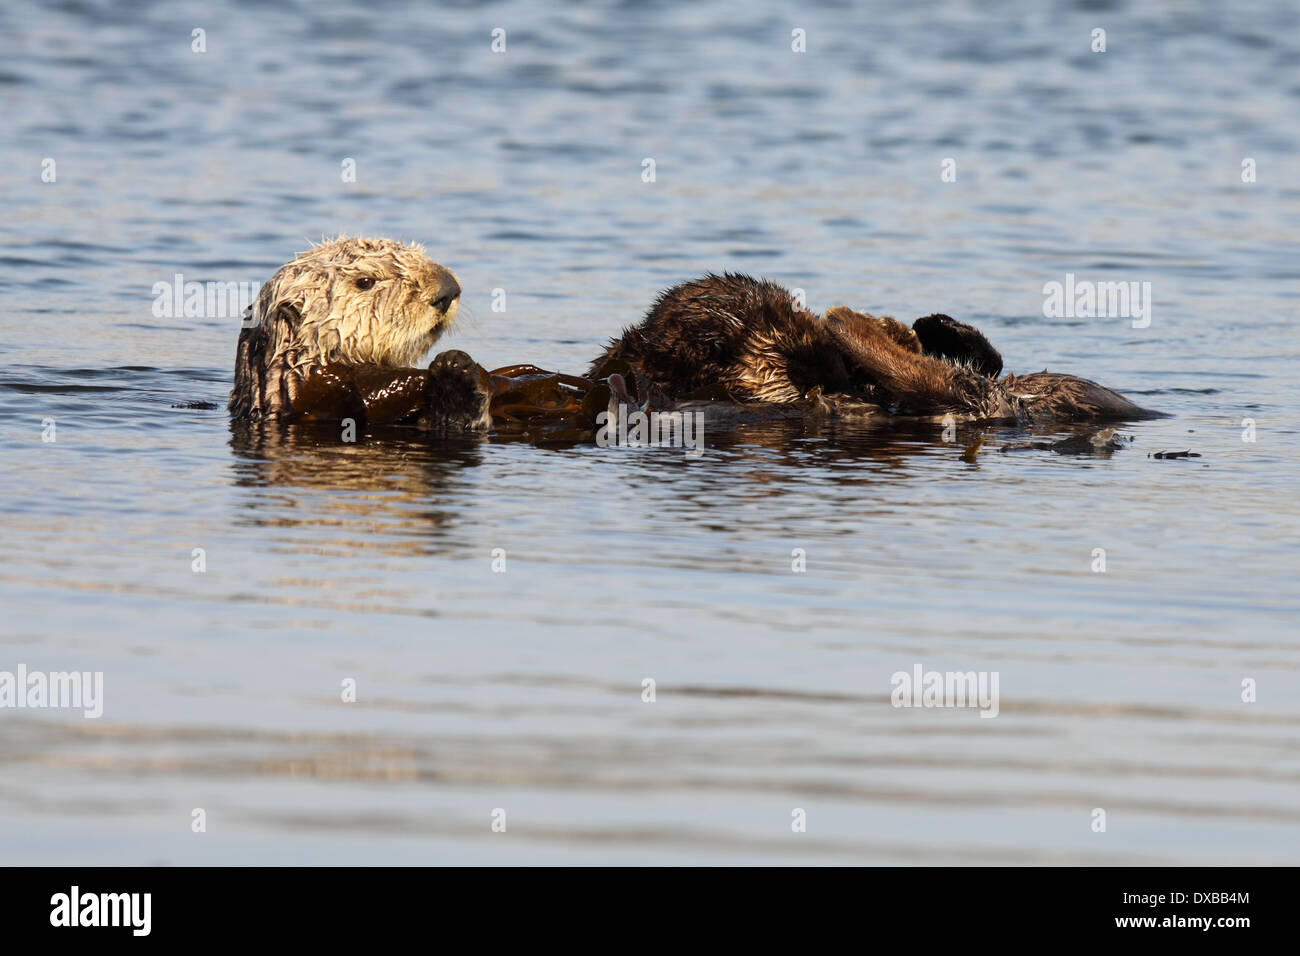 A Sea Otter baby nursing while floating in the Pacific Ocean. Stock Photo